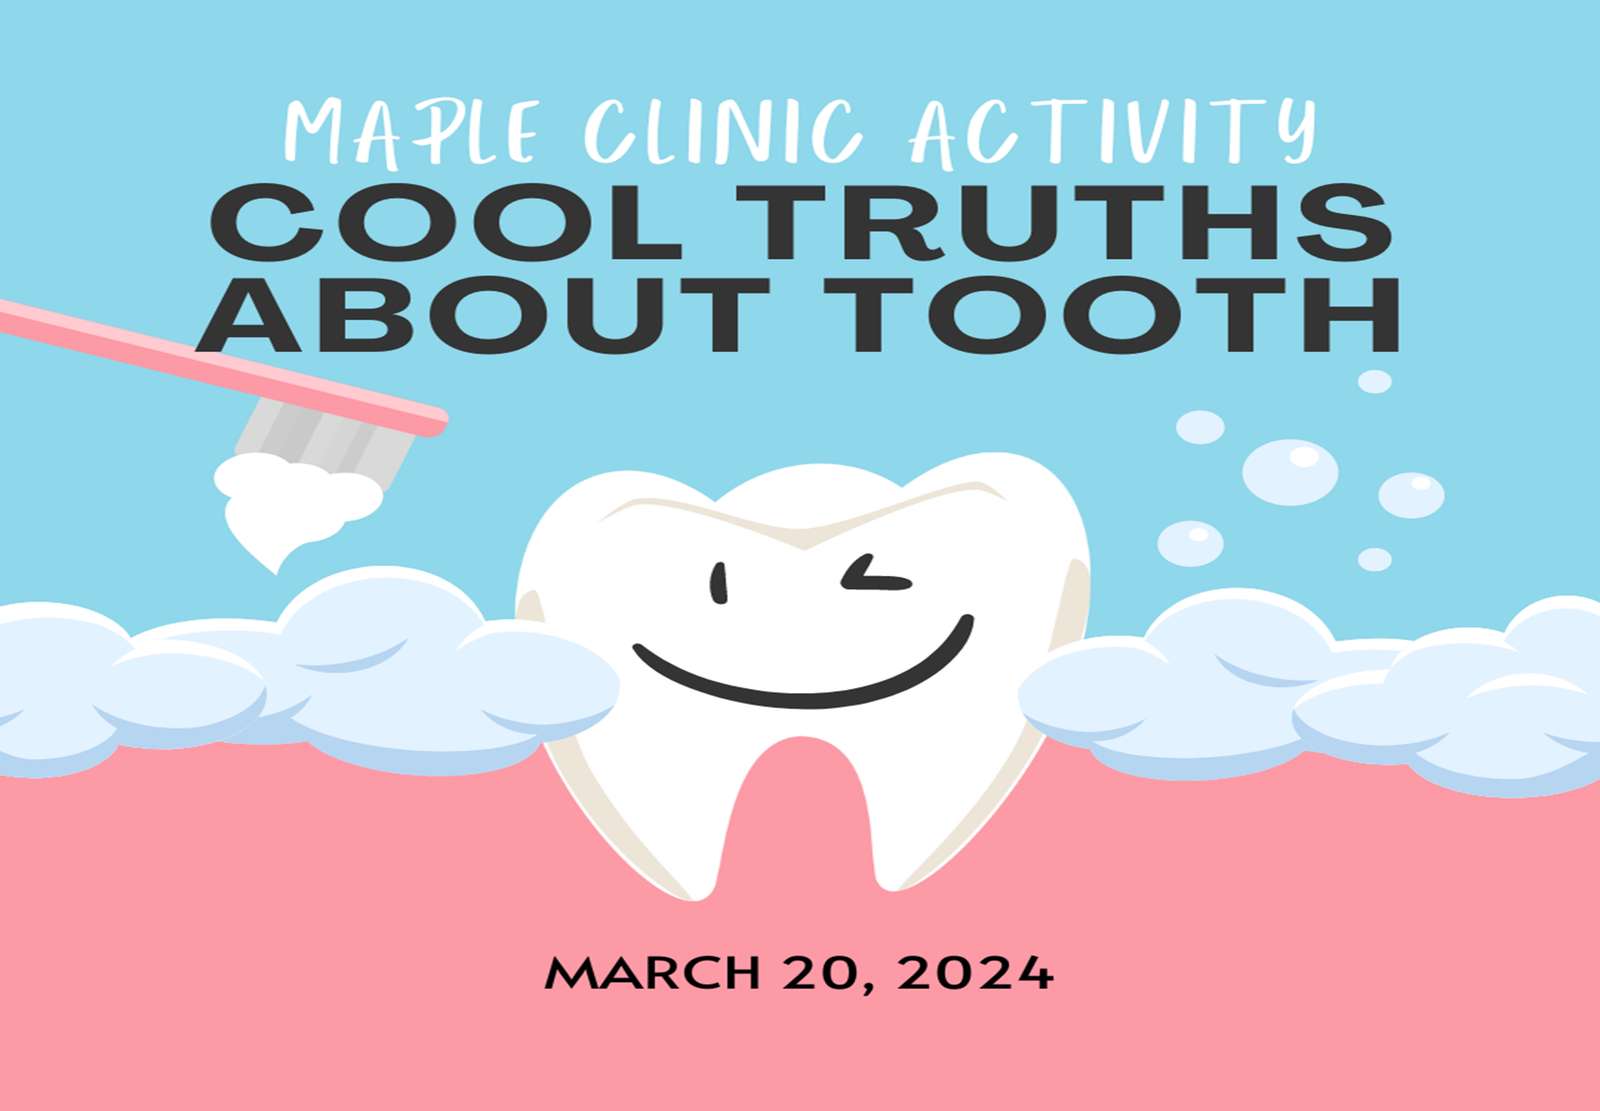 Maple Clinic Activity Cool truths about tooth puzzle online from photo